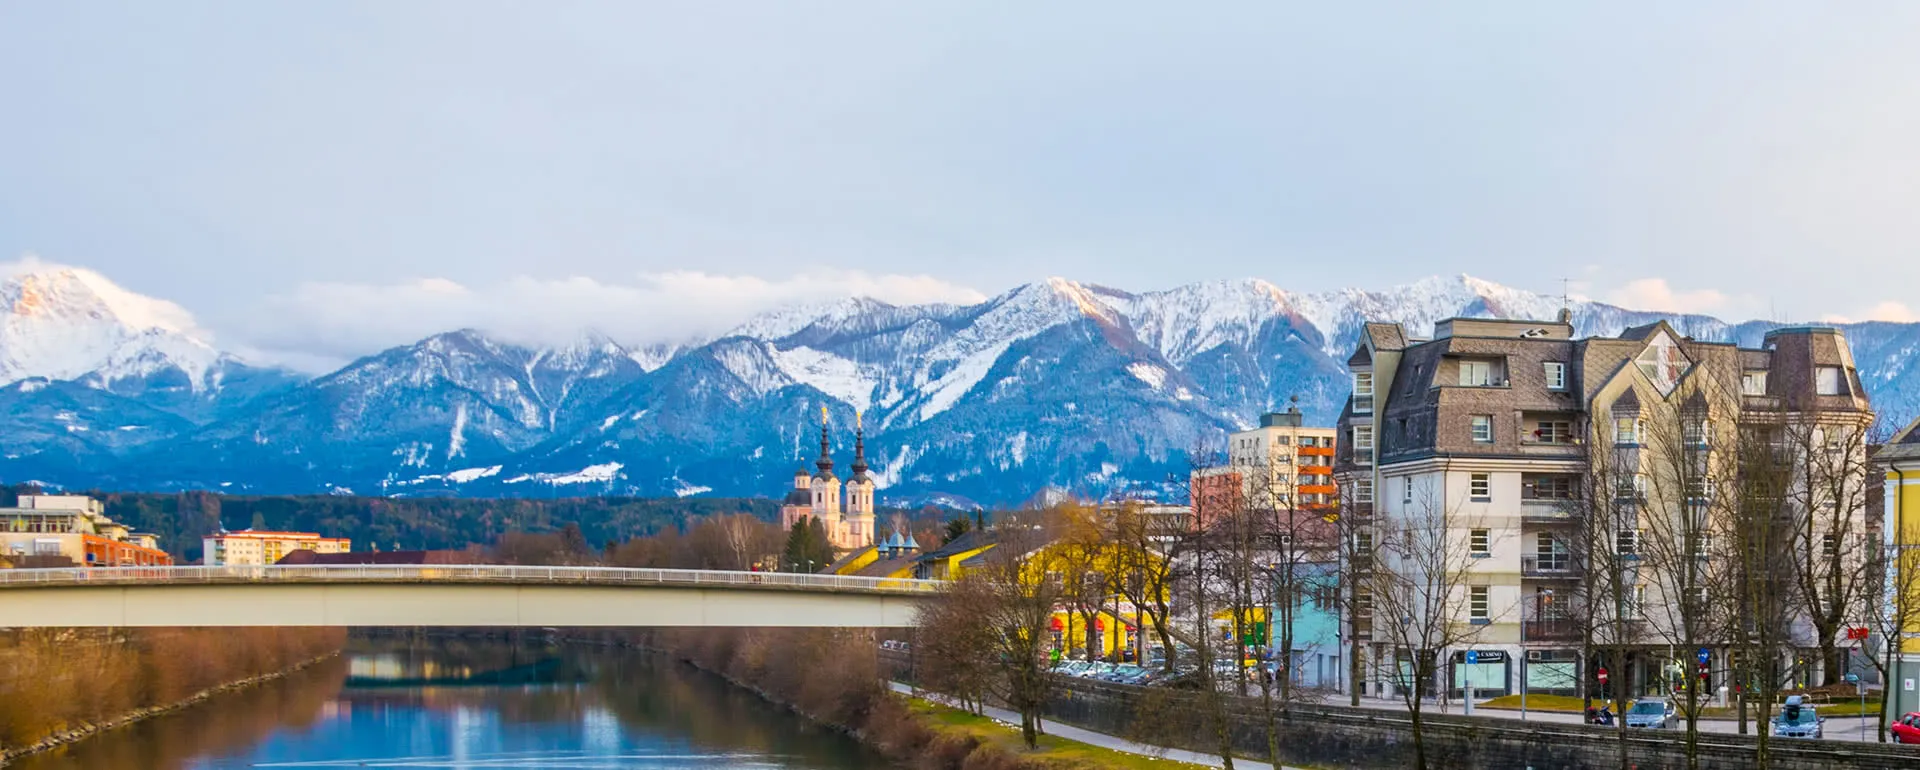 Meeting and conference location Villach